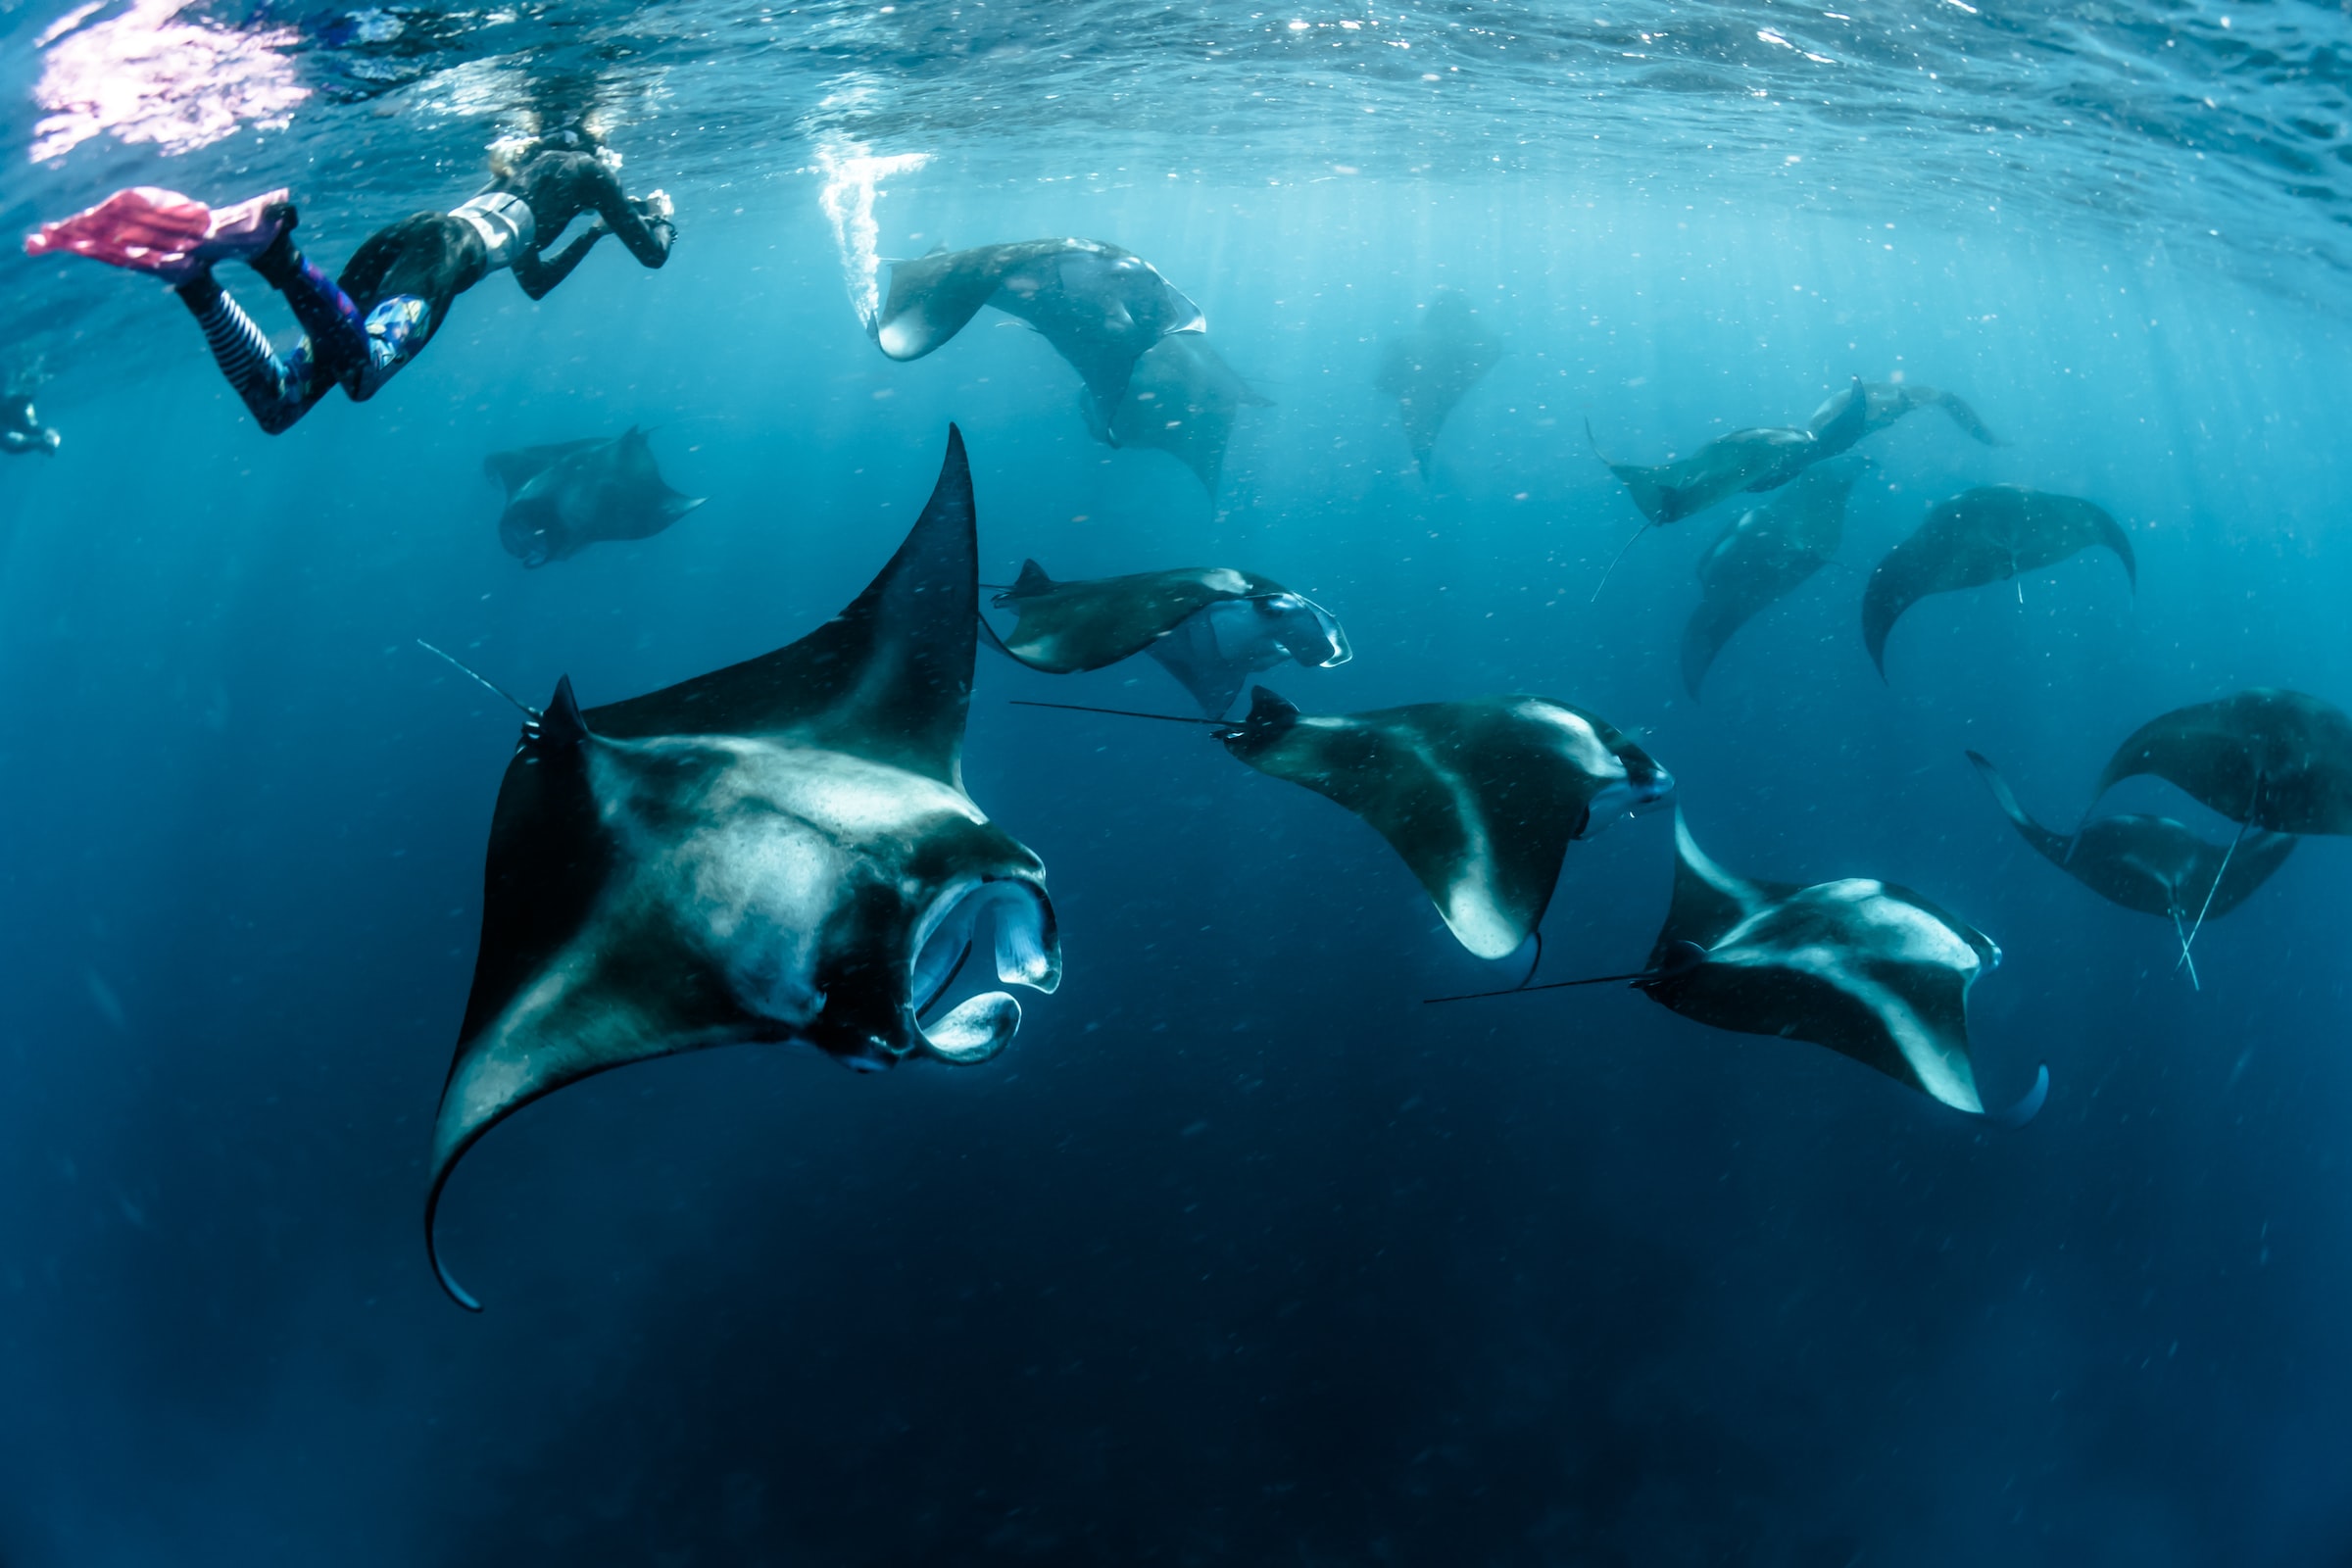 A diver swims with Manta Rays